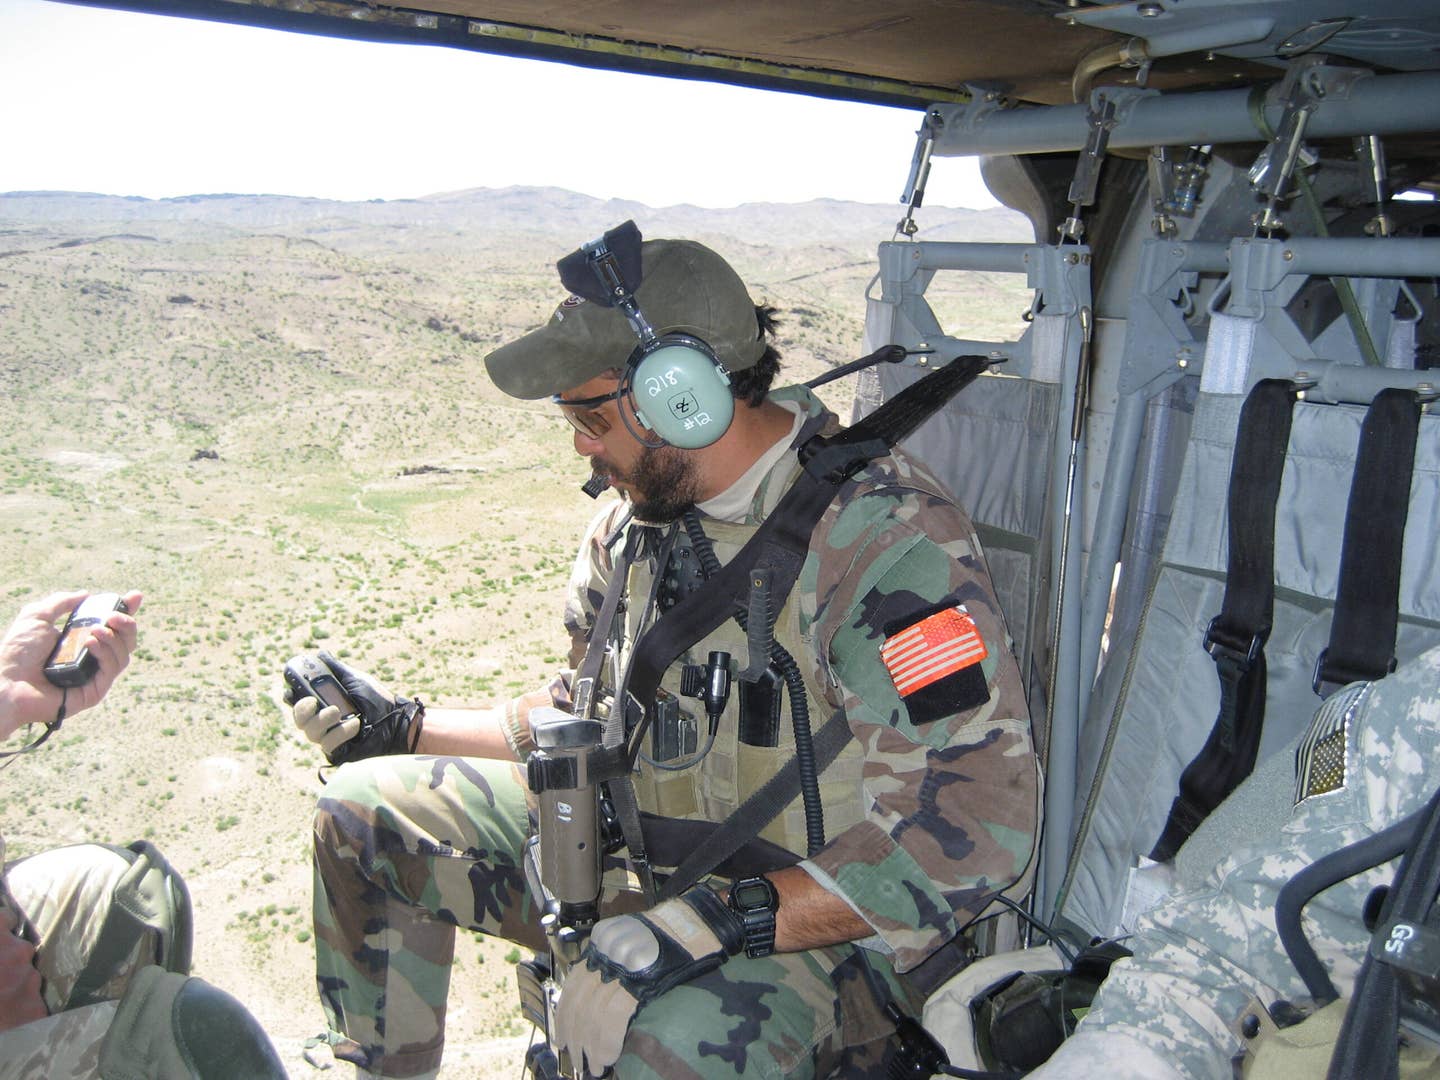 Ruben Ayala in a helicopter.